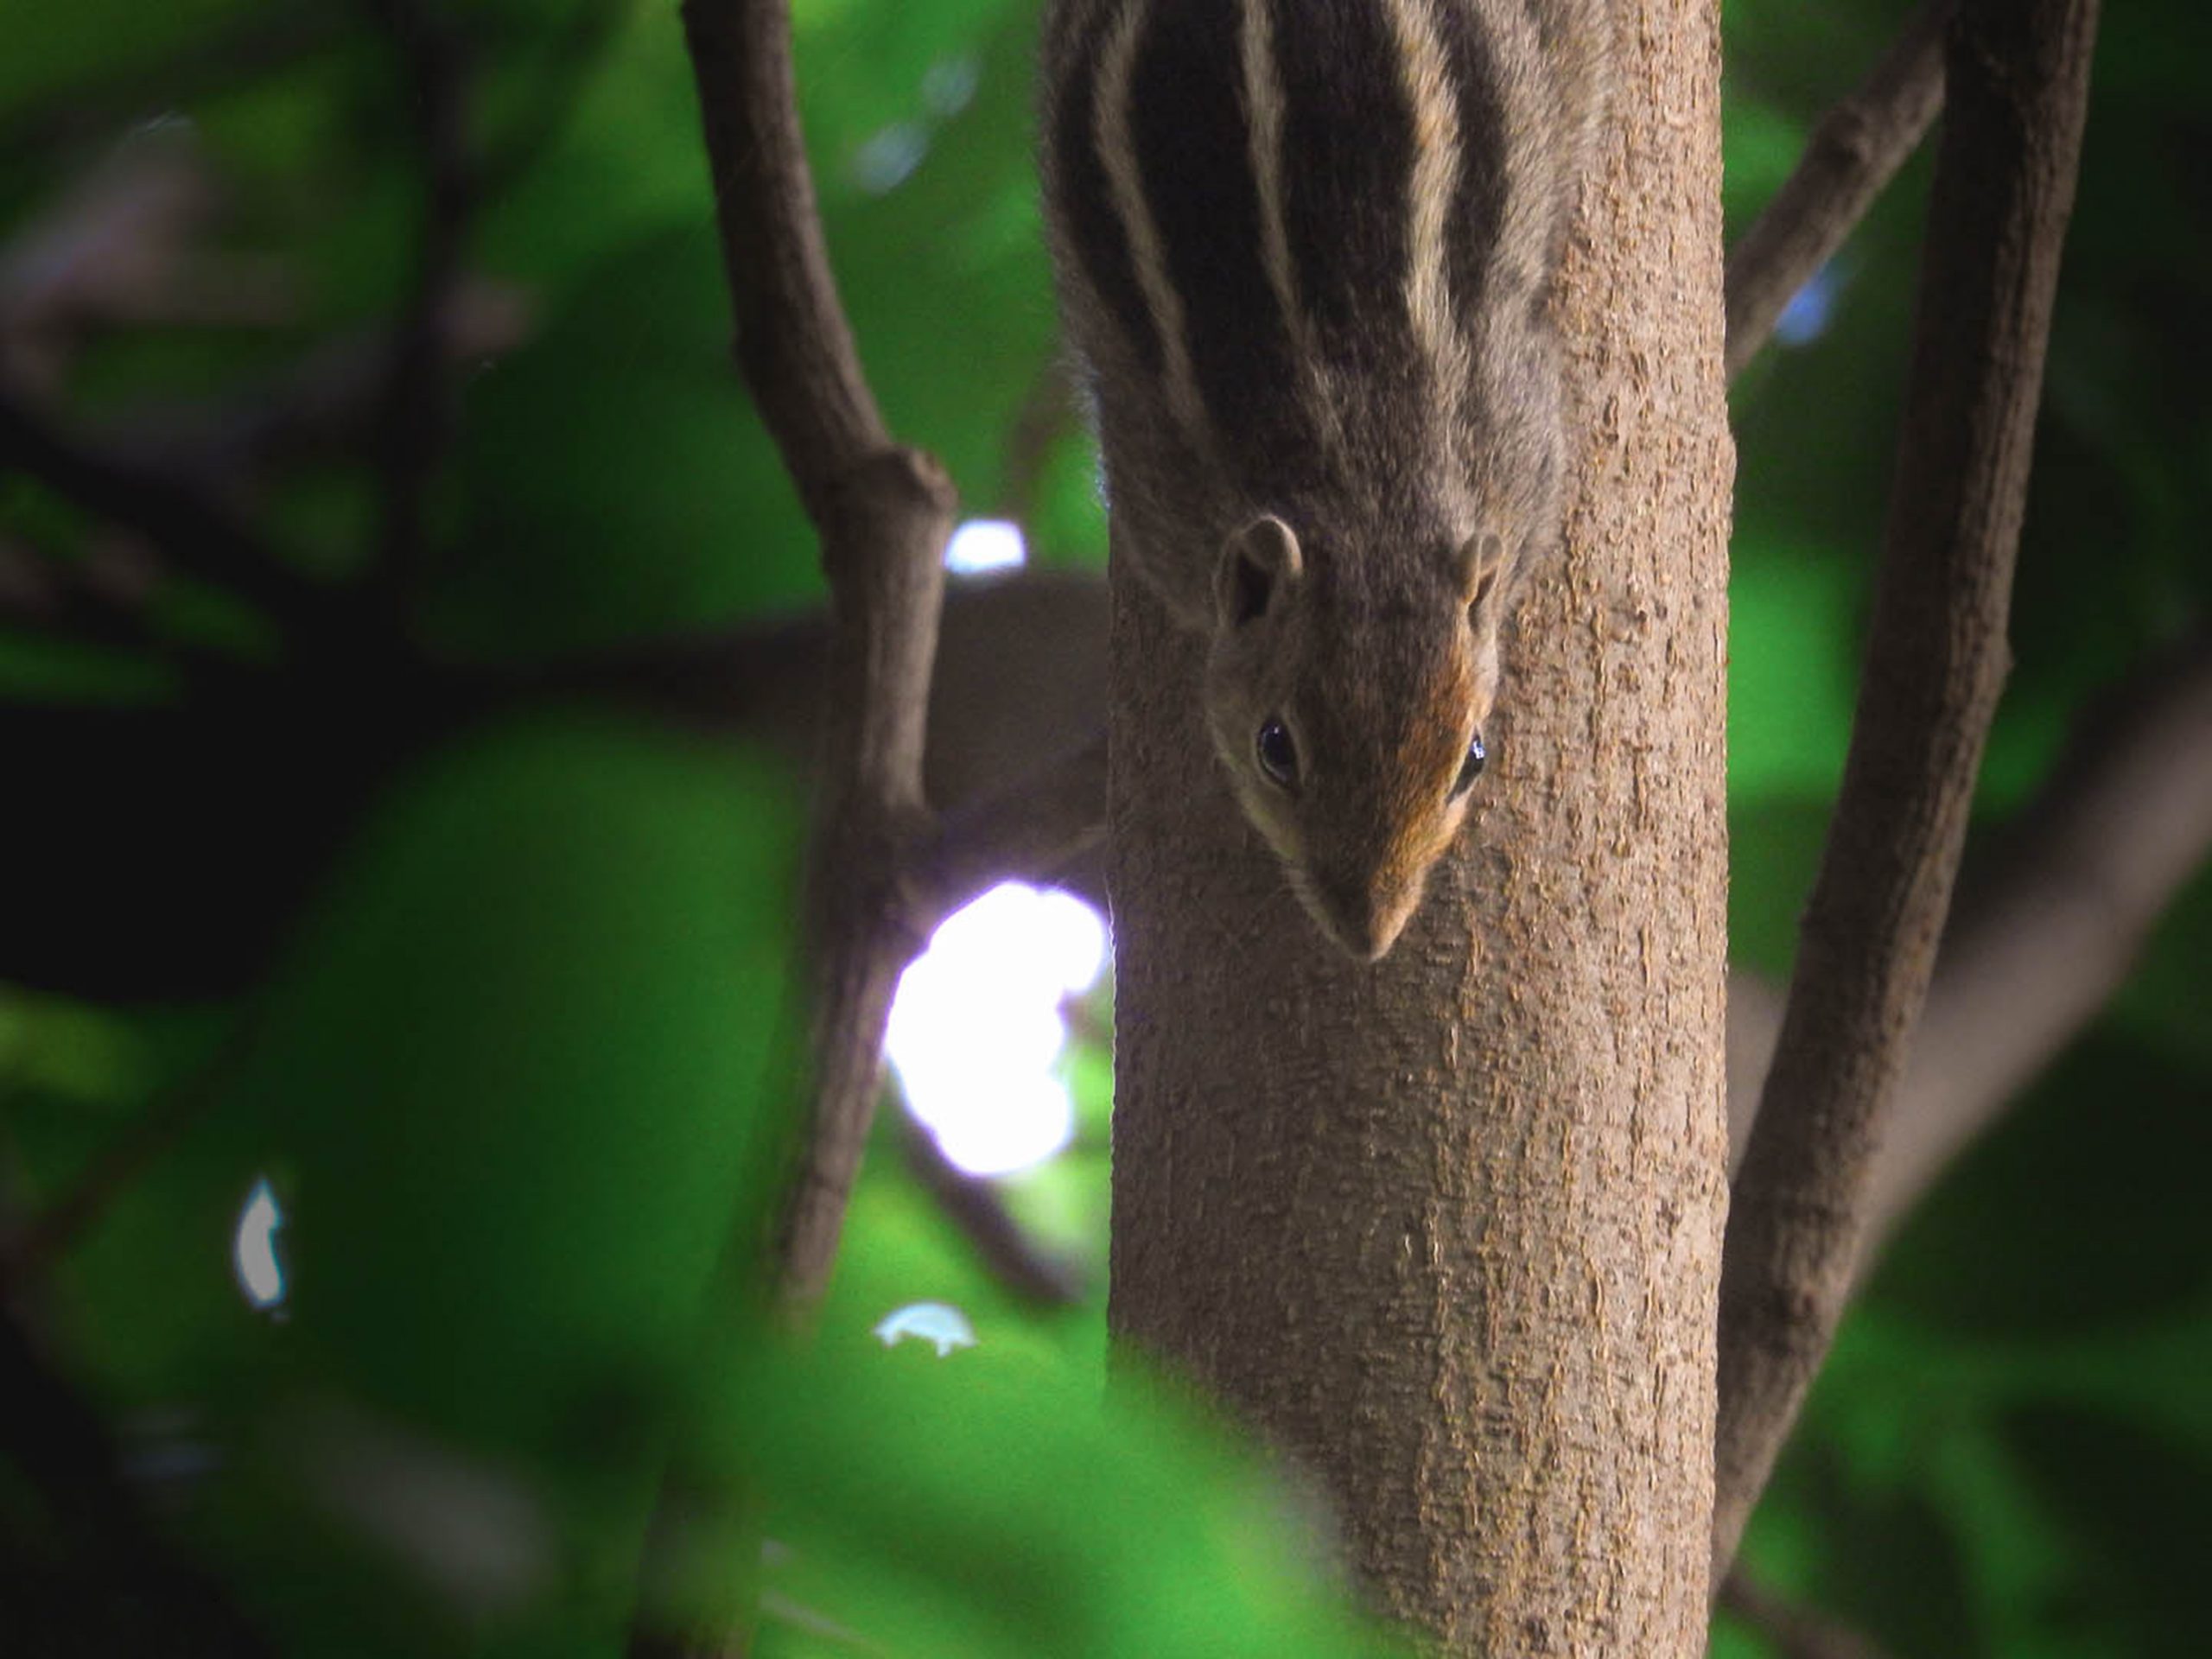 The Indian Palm Squirrel